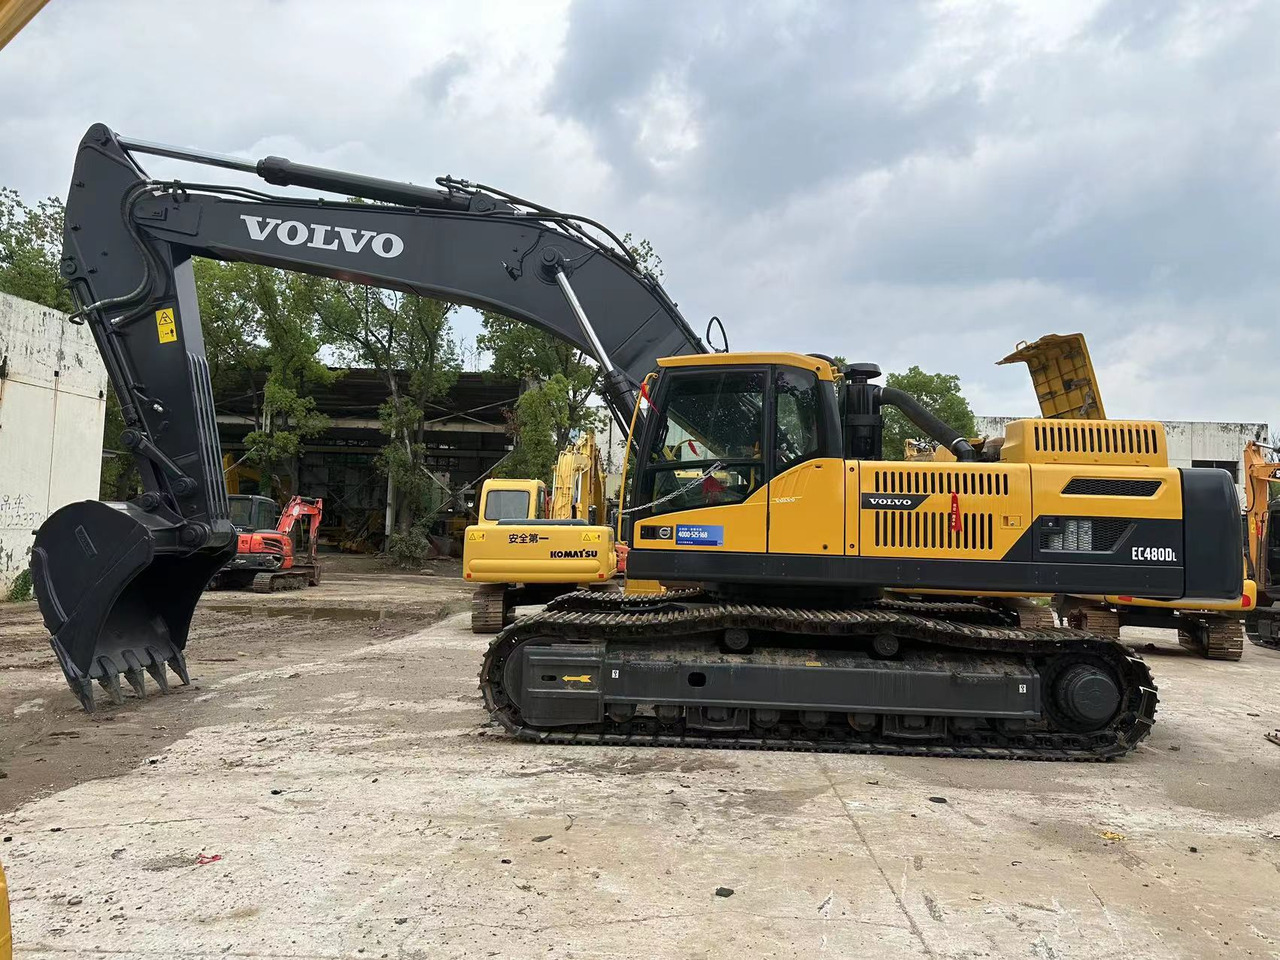 Hot selling original made Used excavator VOLVO EC480DL in stock low price for sale lizingą Hot selling original made Used excavator VOLVO EC480DL in stock low price for sale: foto 2